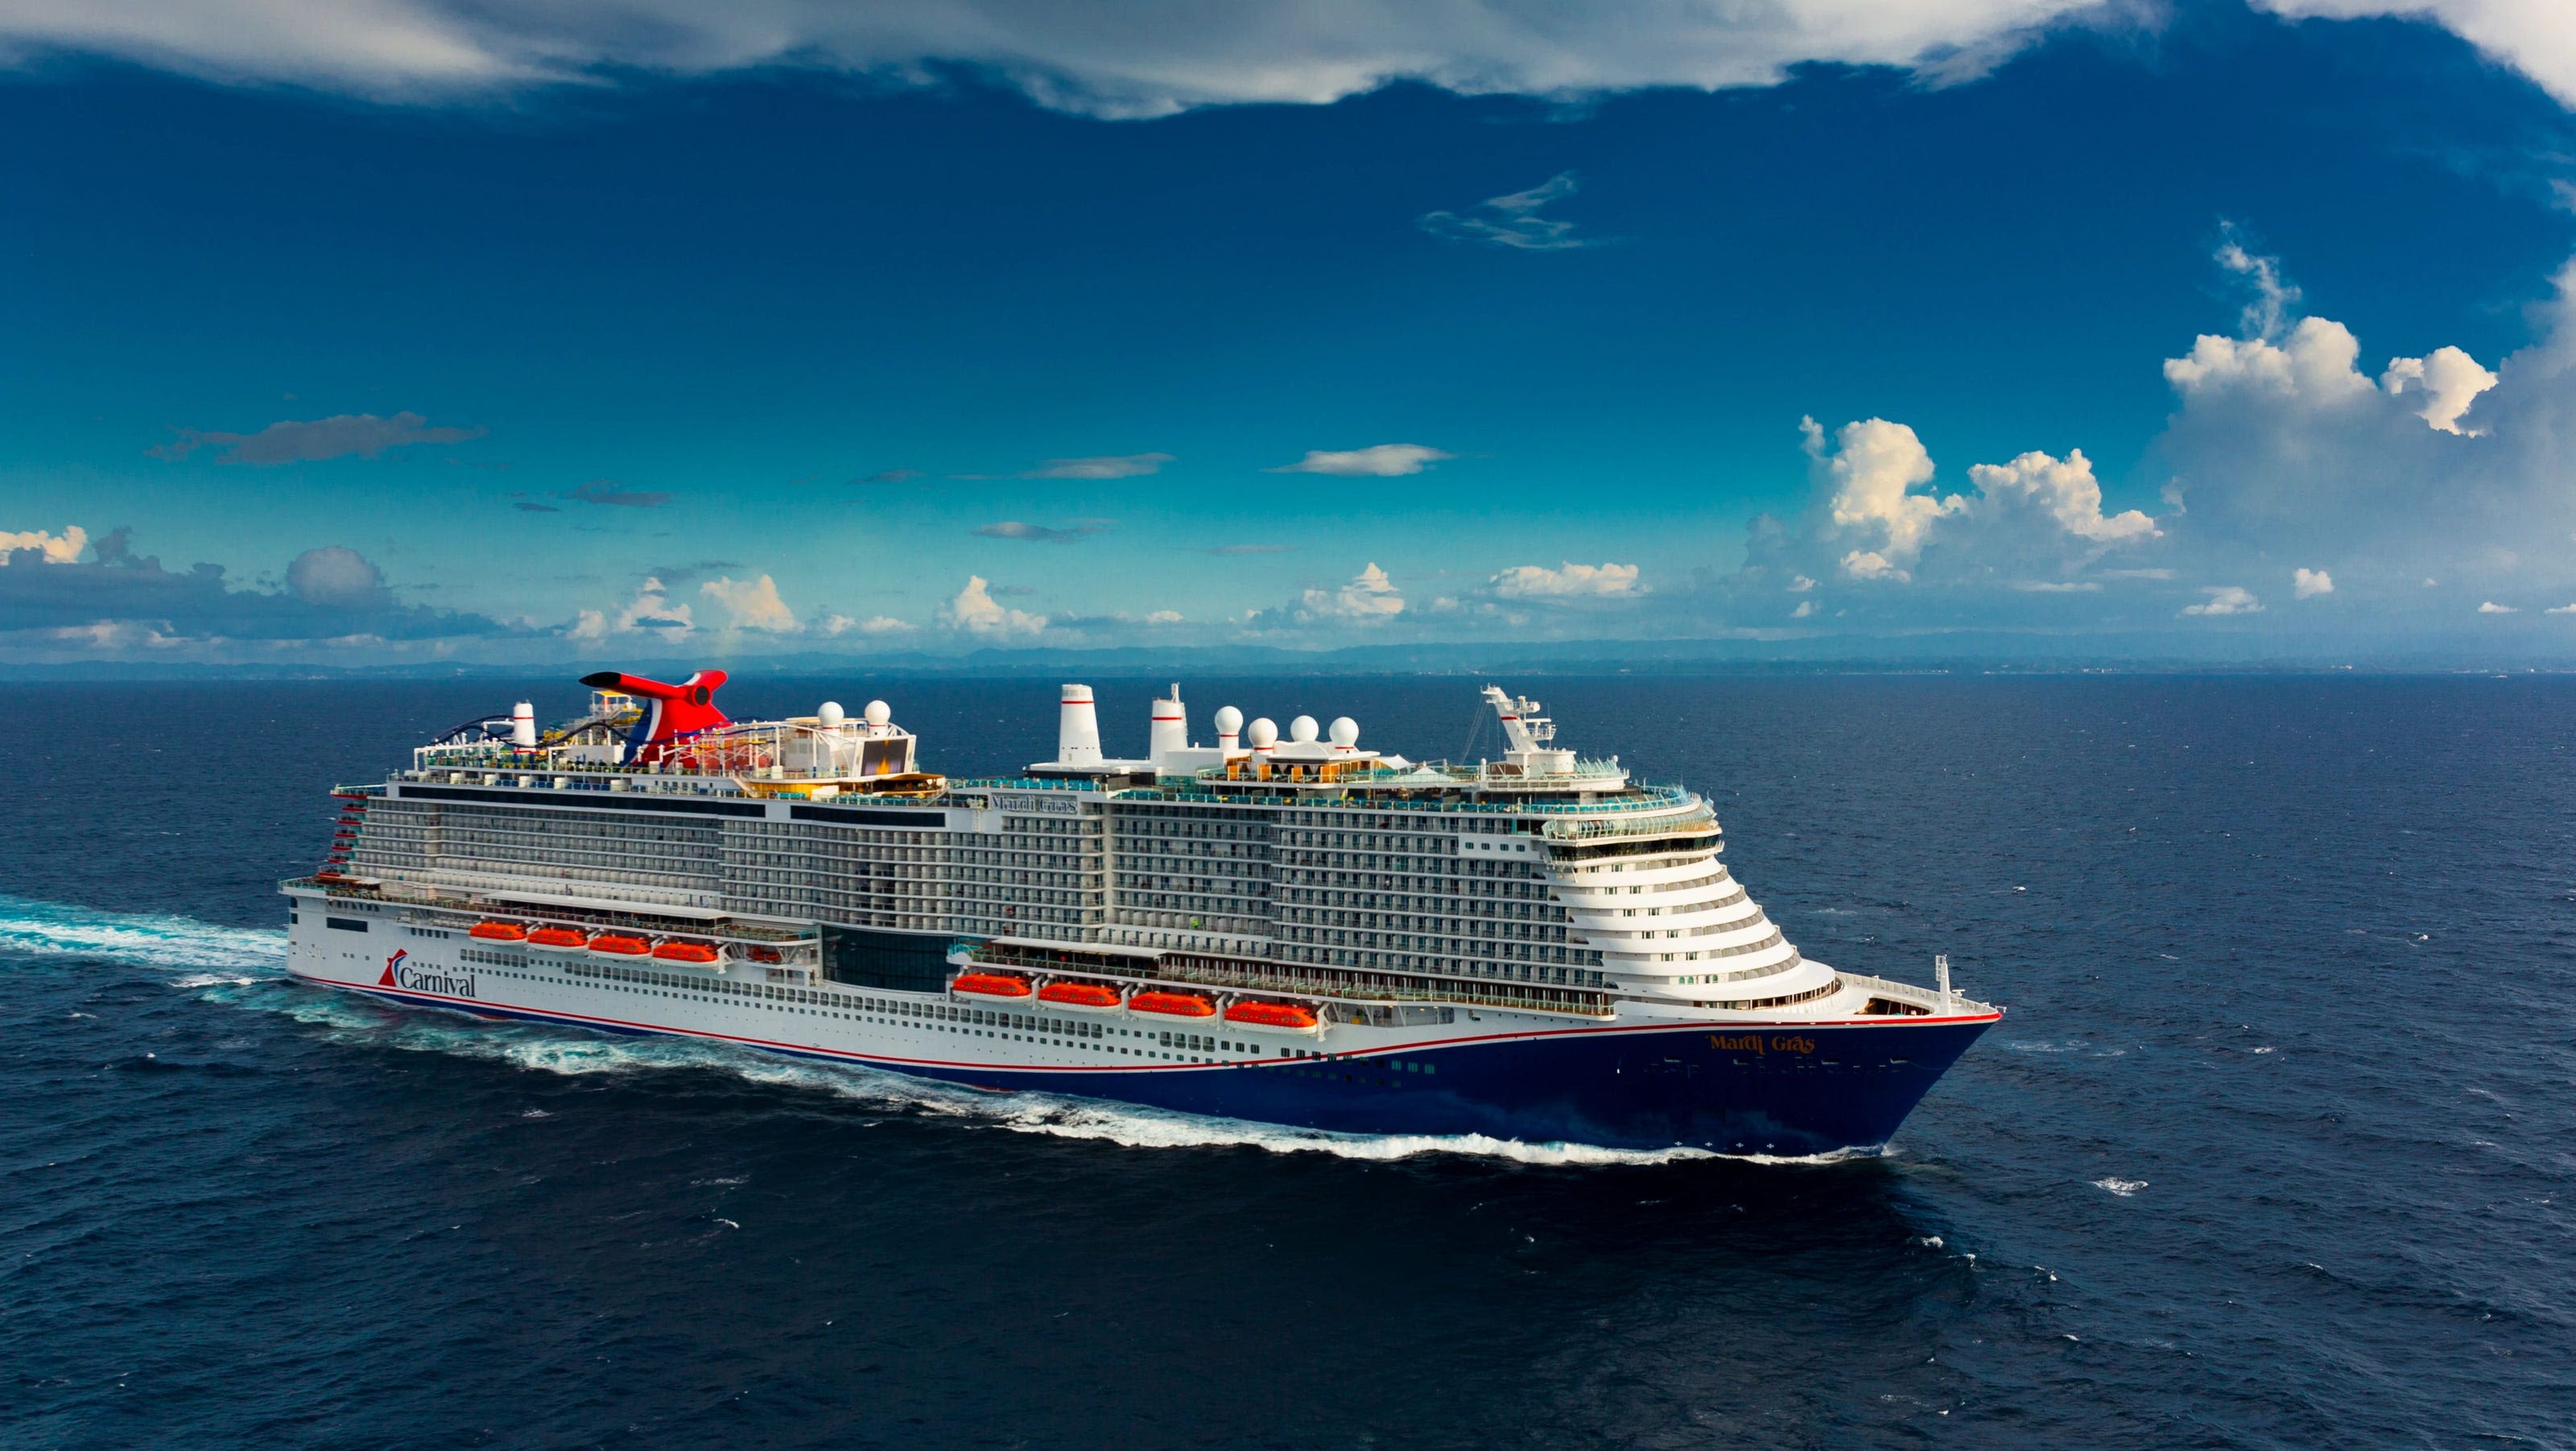 Carnival Cruise Line will launch biggest ships ever starting in 2029